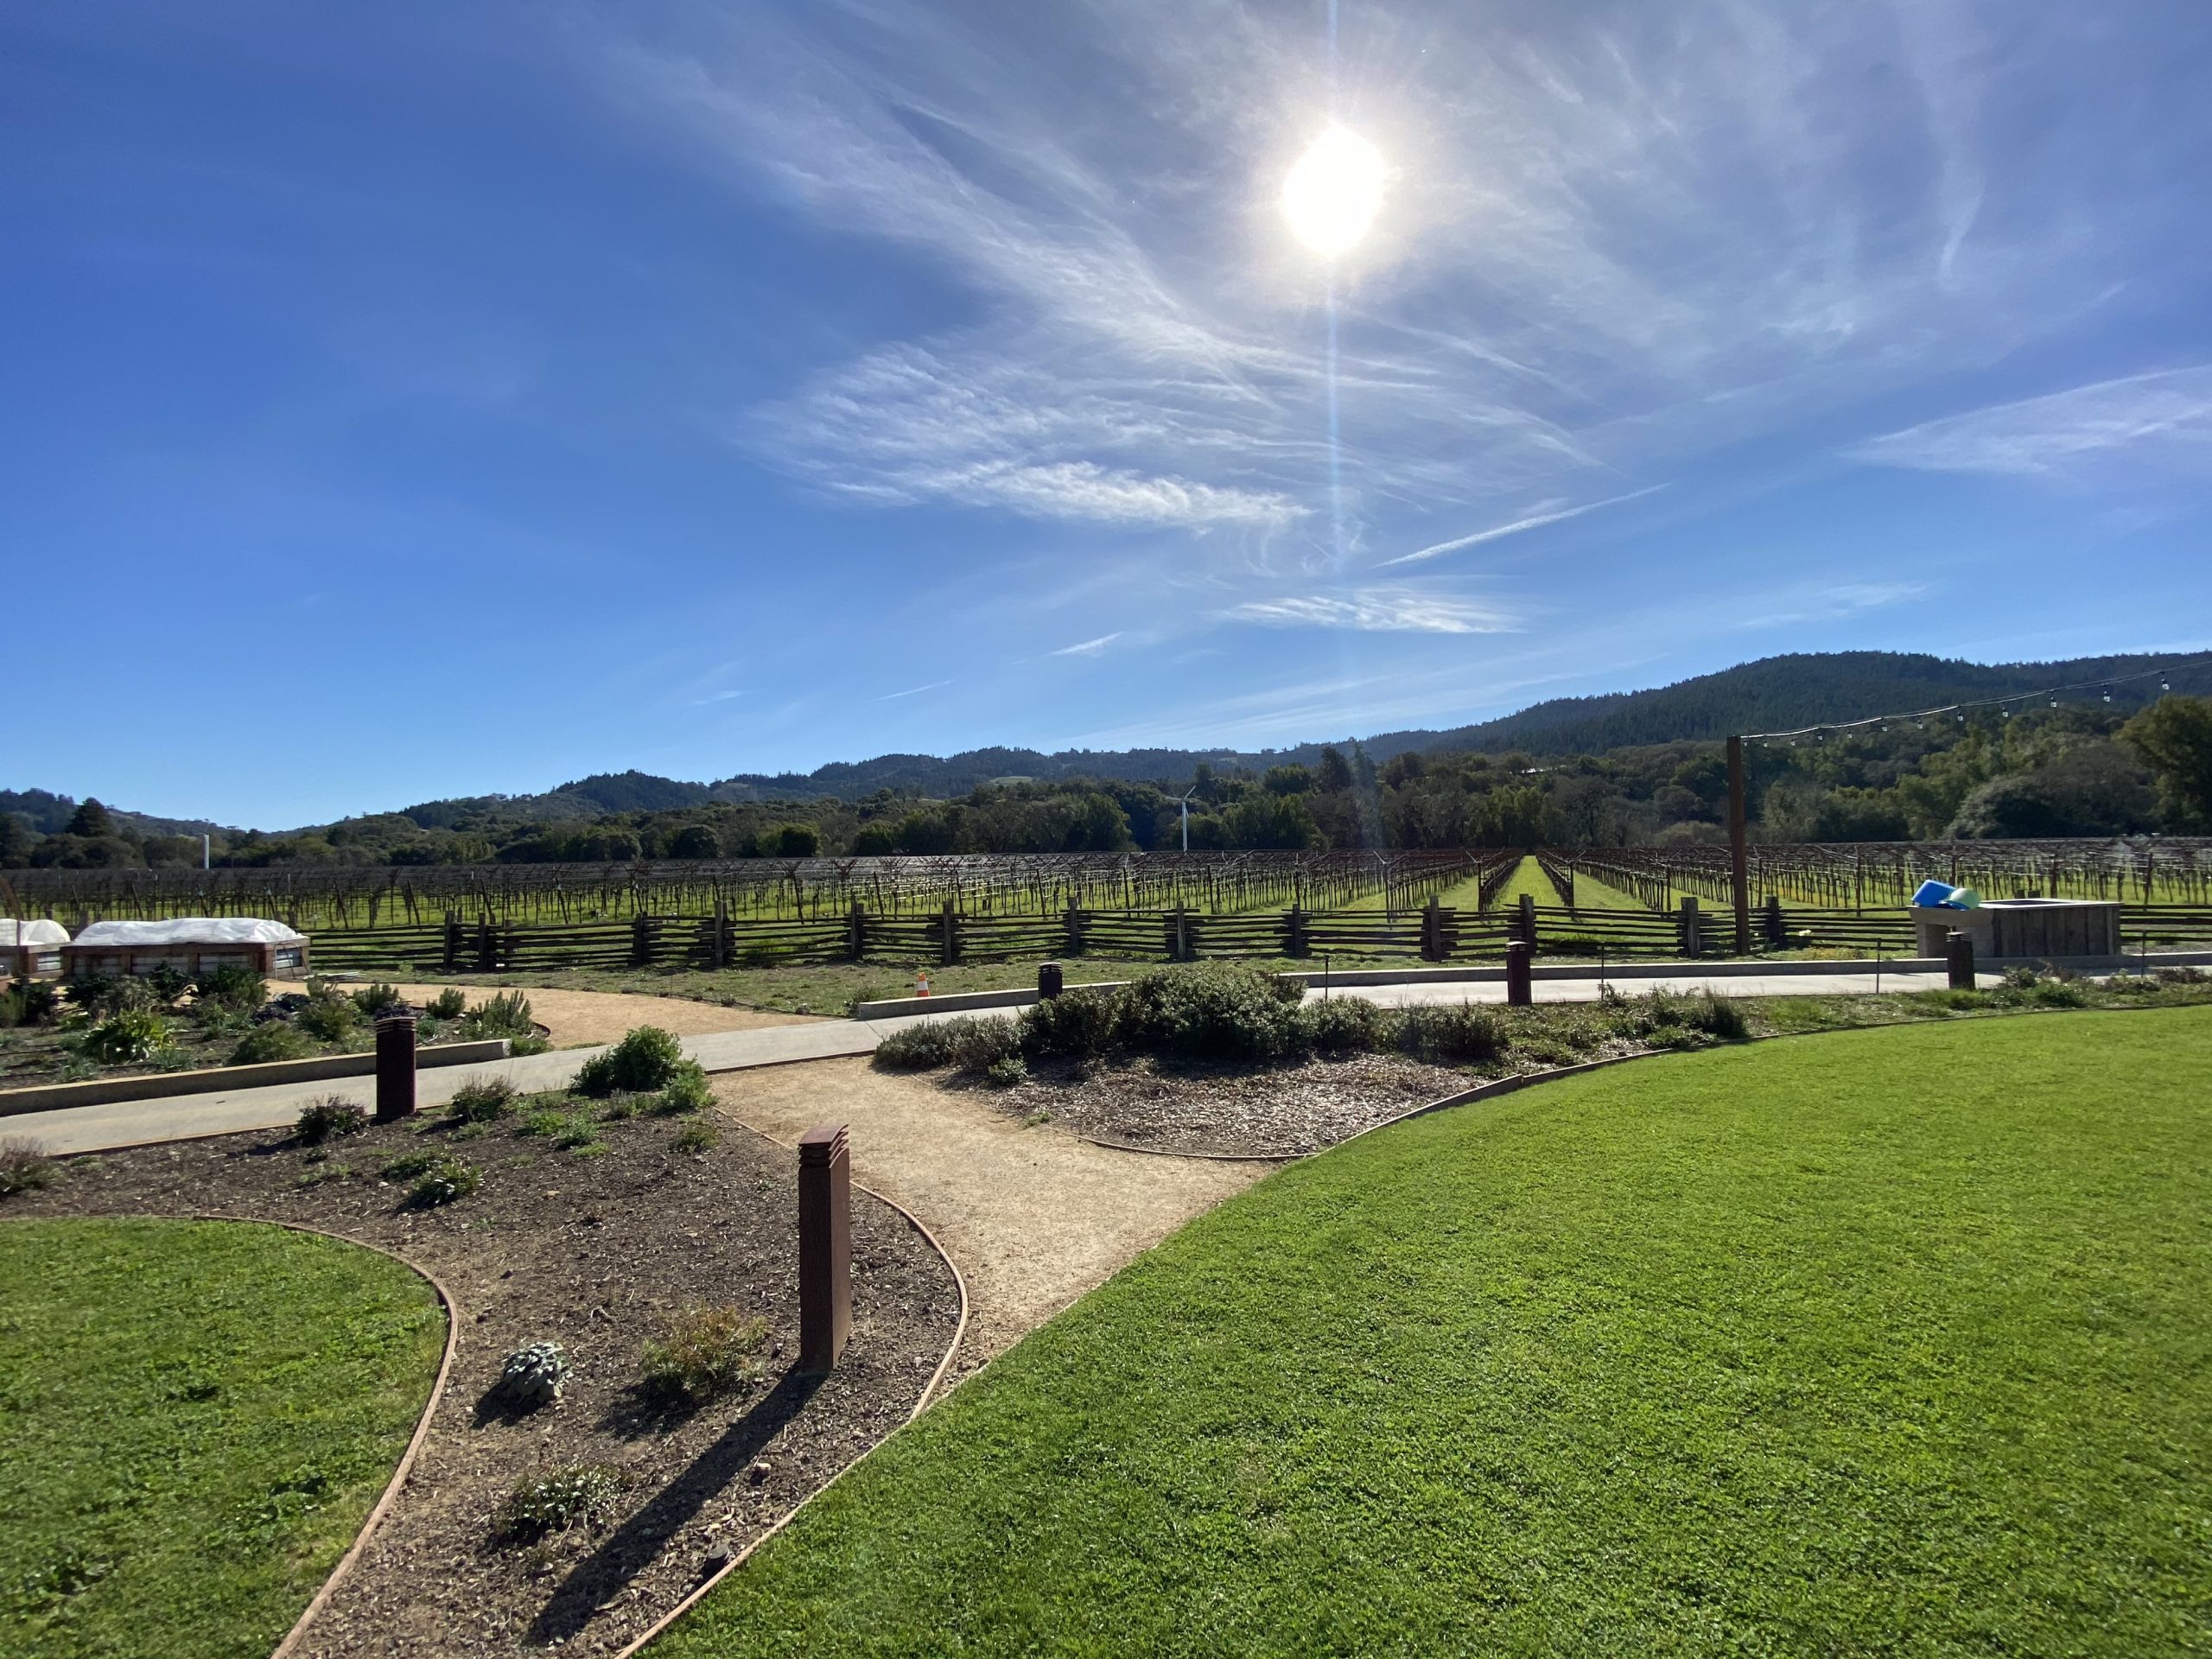 My Five Favorite Wineries In Anderson Valley, California